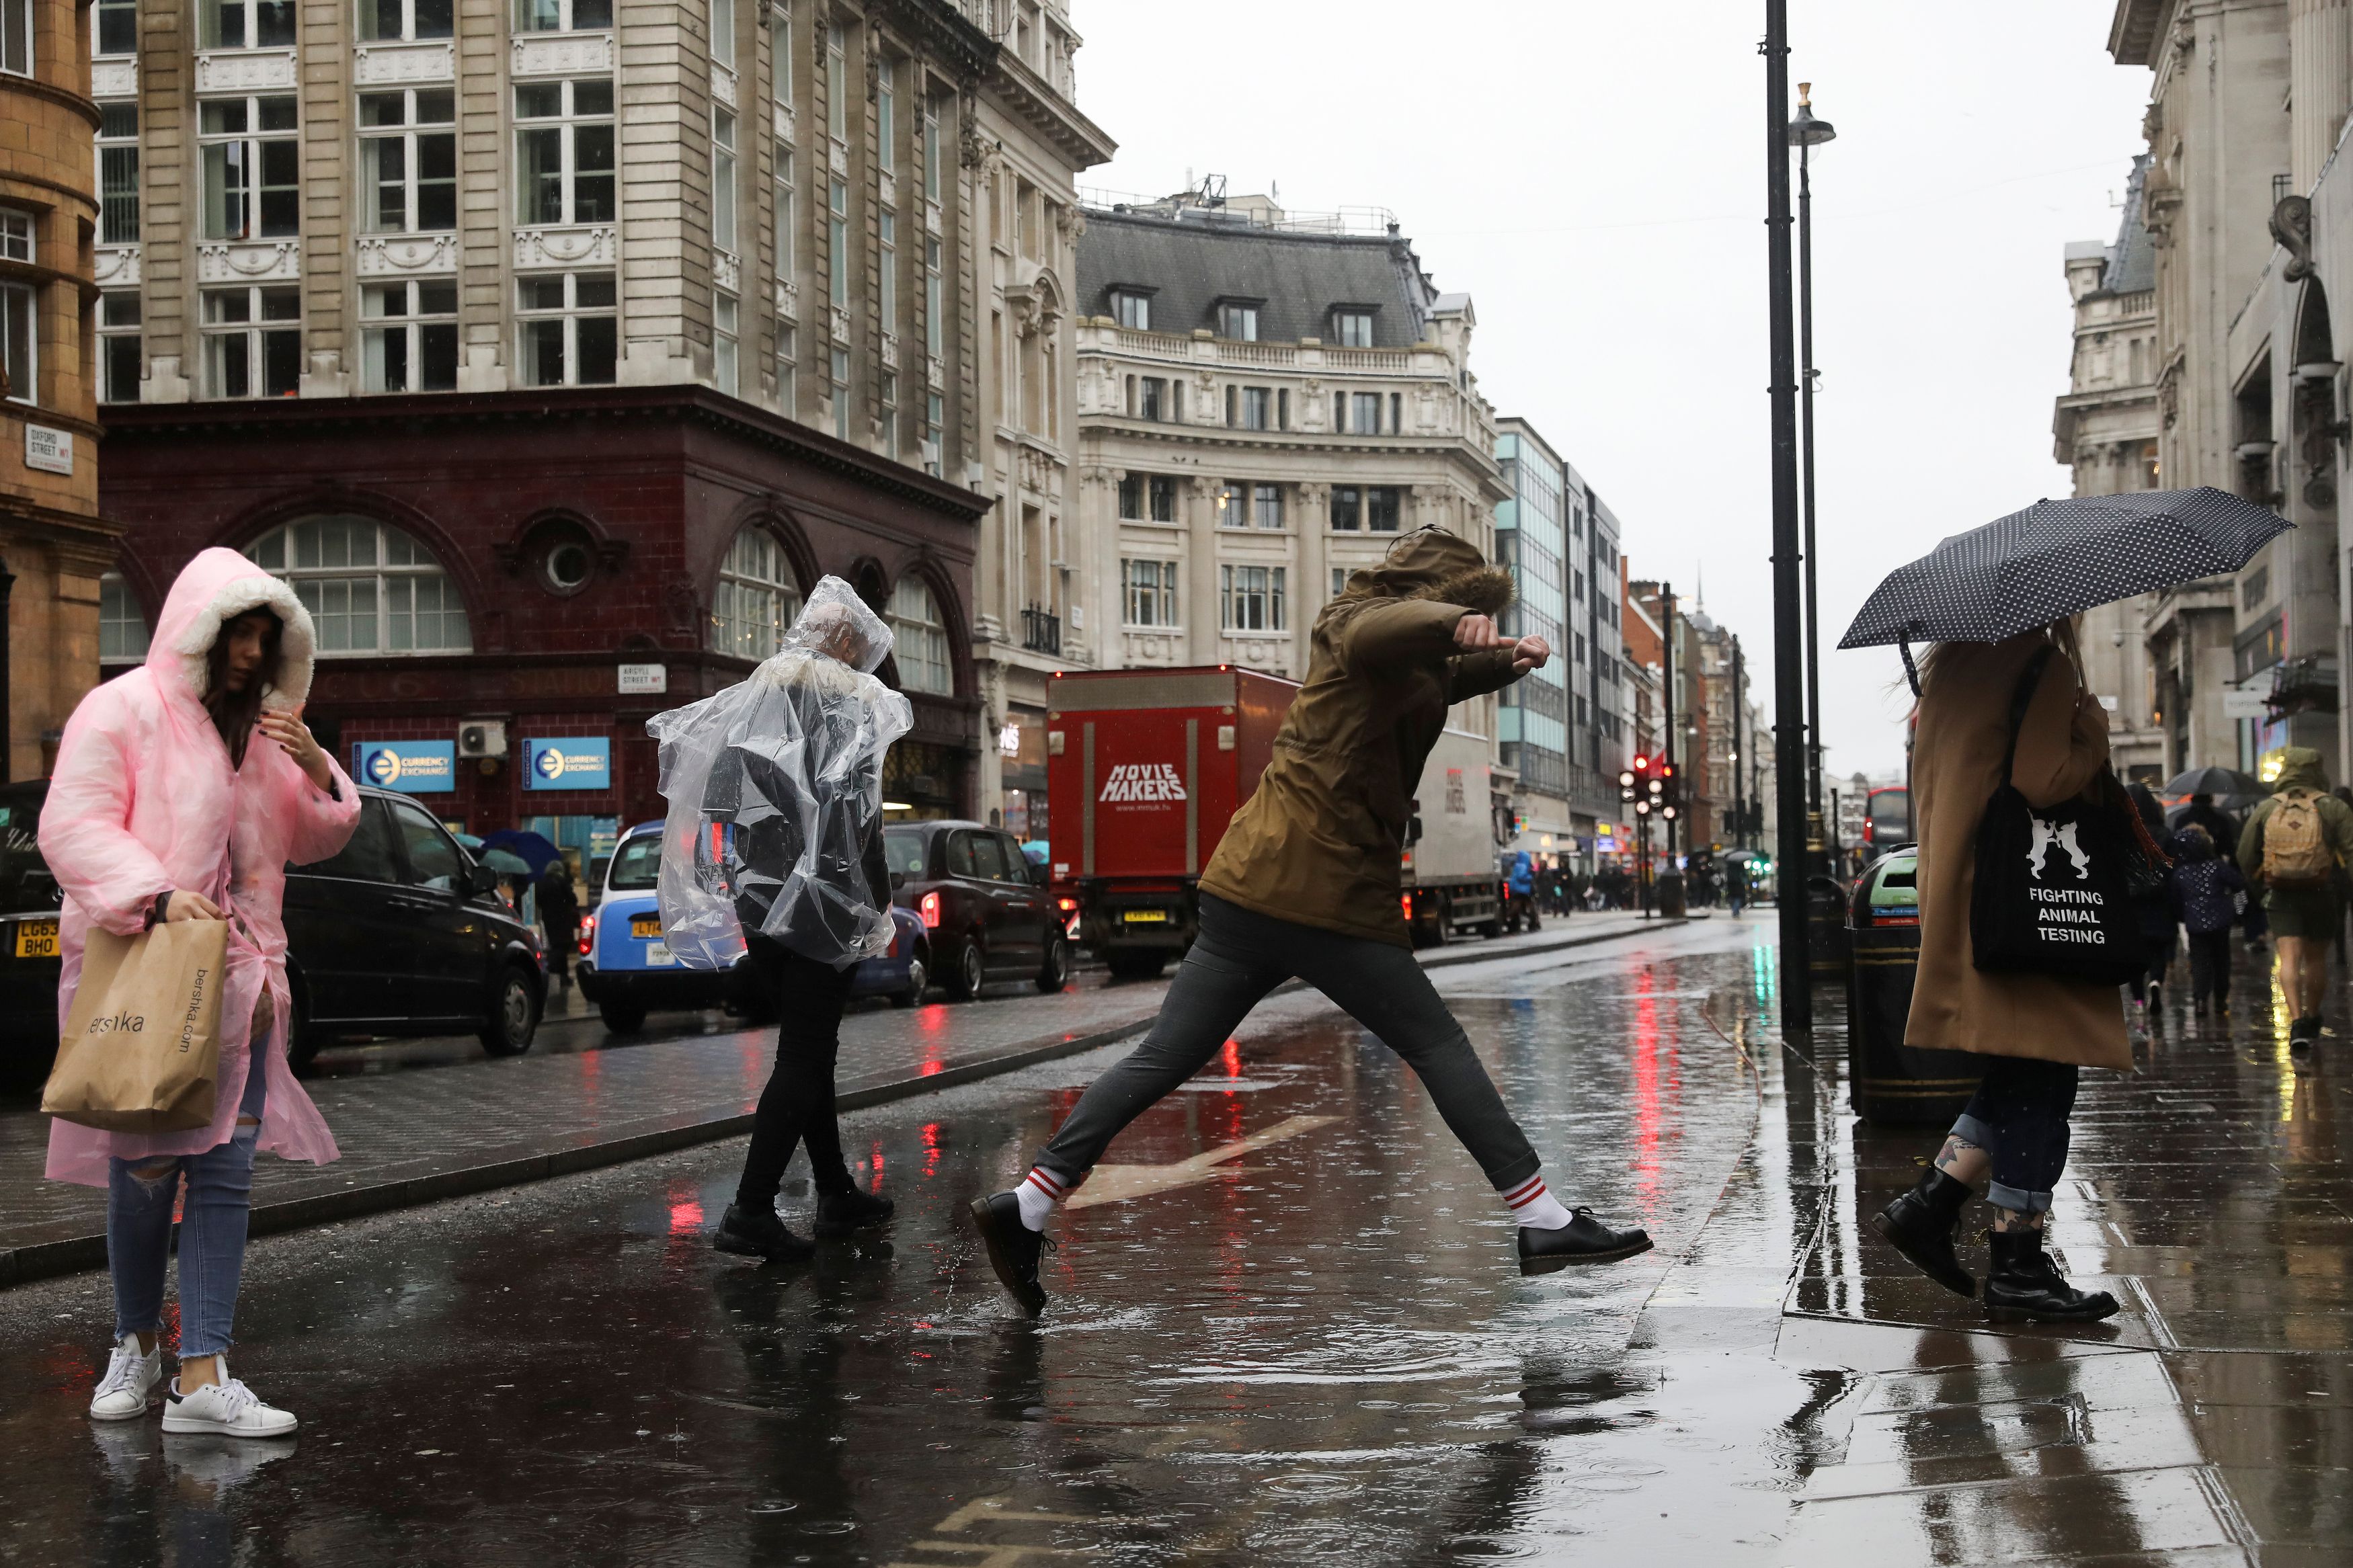 Pedestrians try to avoid a puddle as they walk down Oxford Street in London